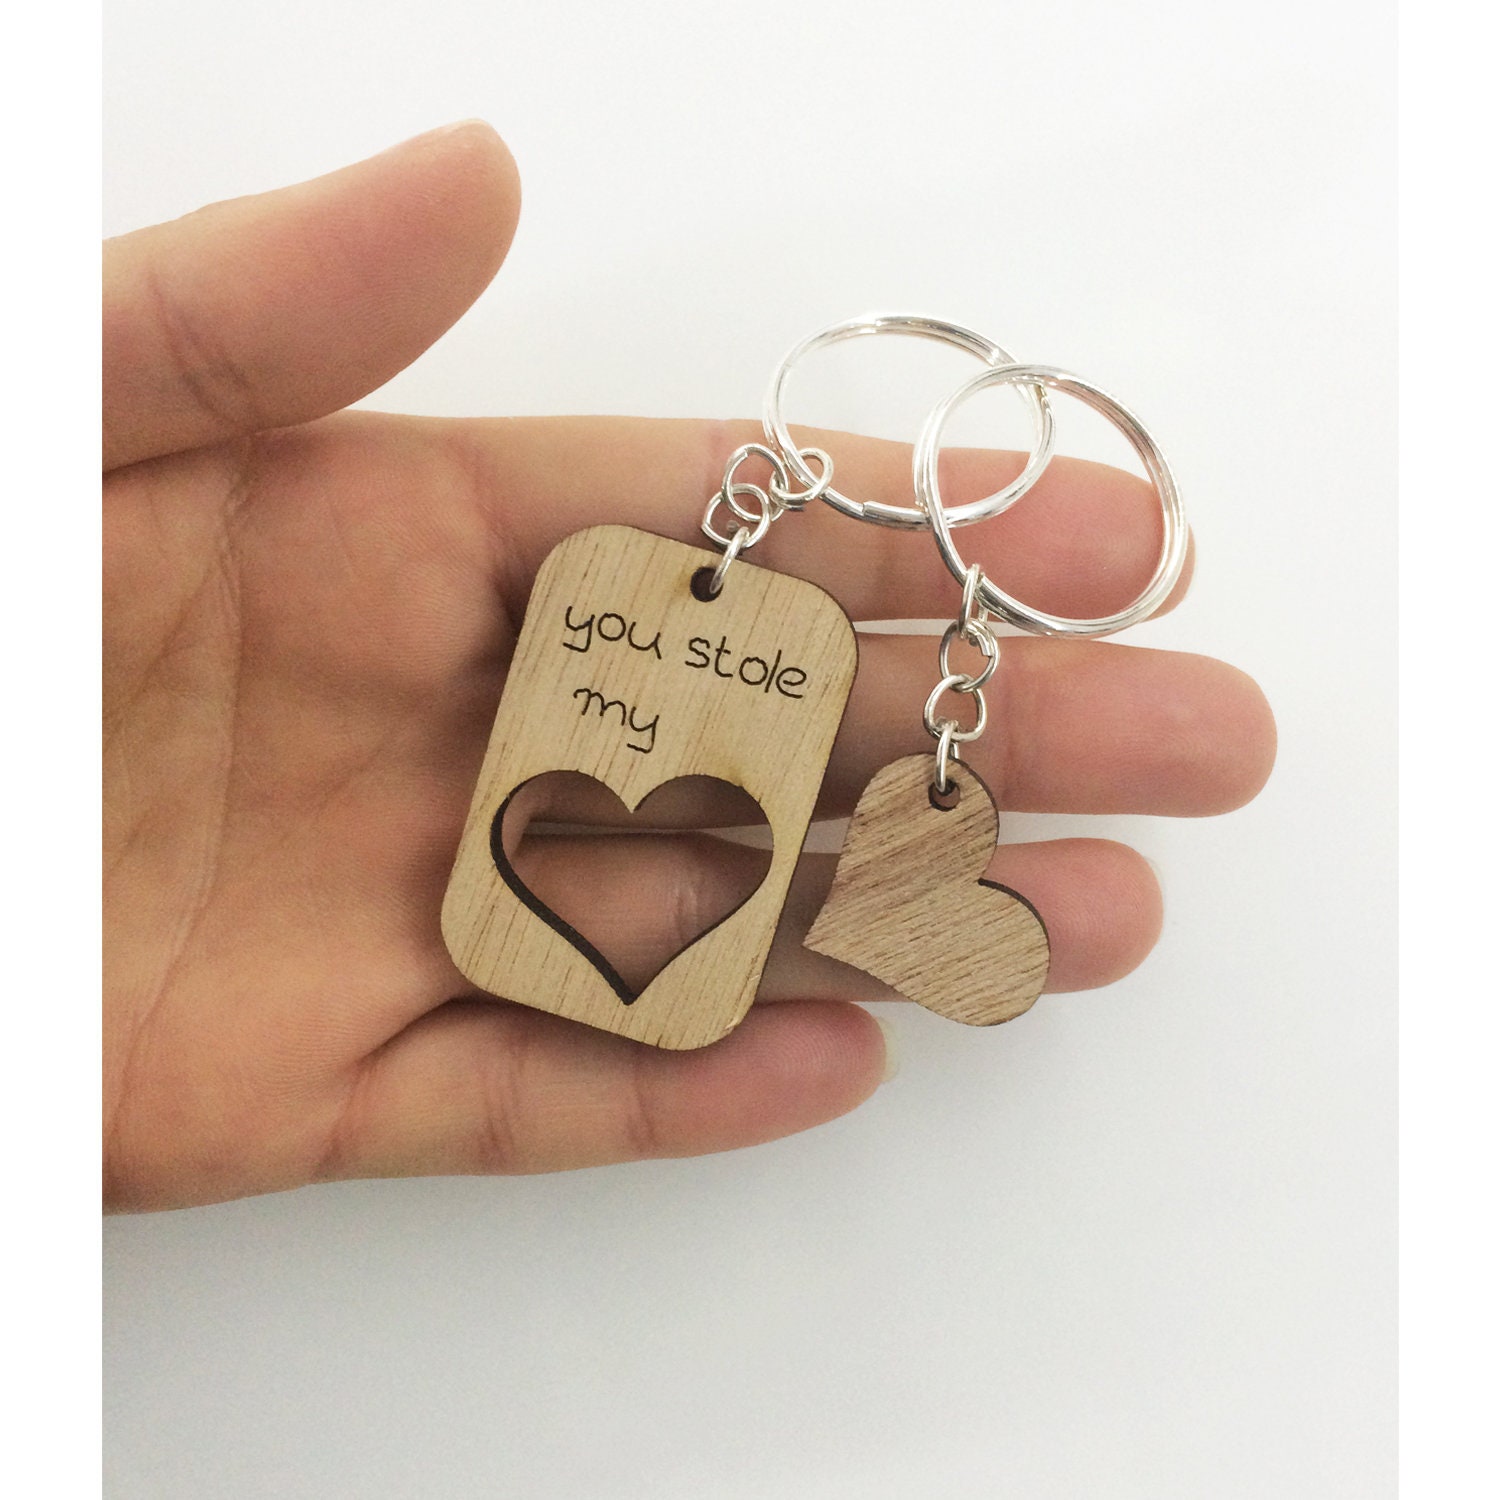 Henoyso 20 Pieces Inspirational Keychain Gifts Heart Wooden Keychain for Women Men Motivational Quote Key Chains Rings Christmas Thank You Gifts for